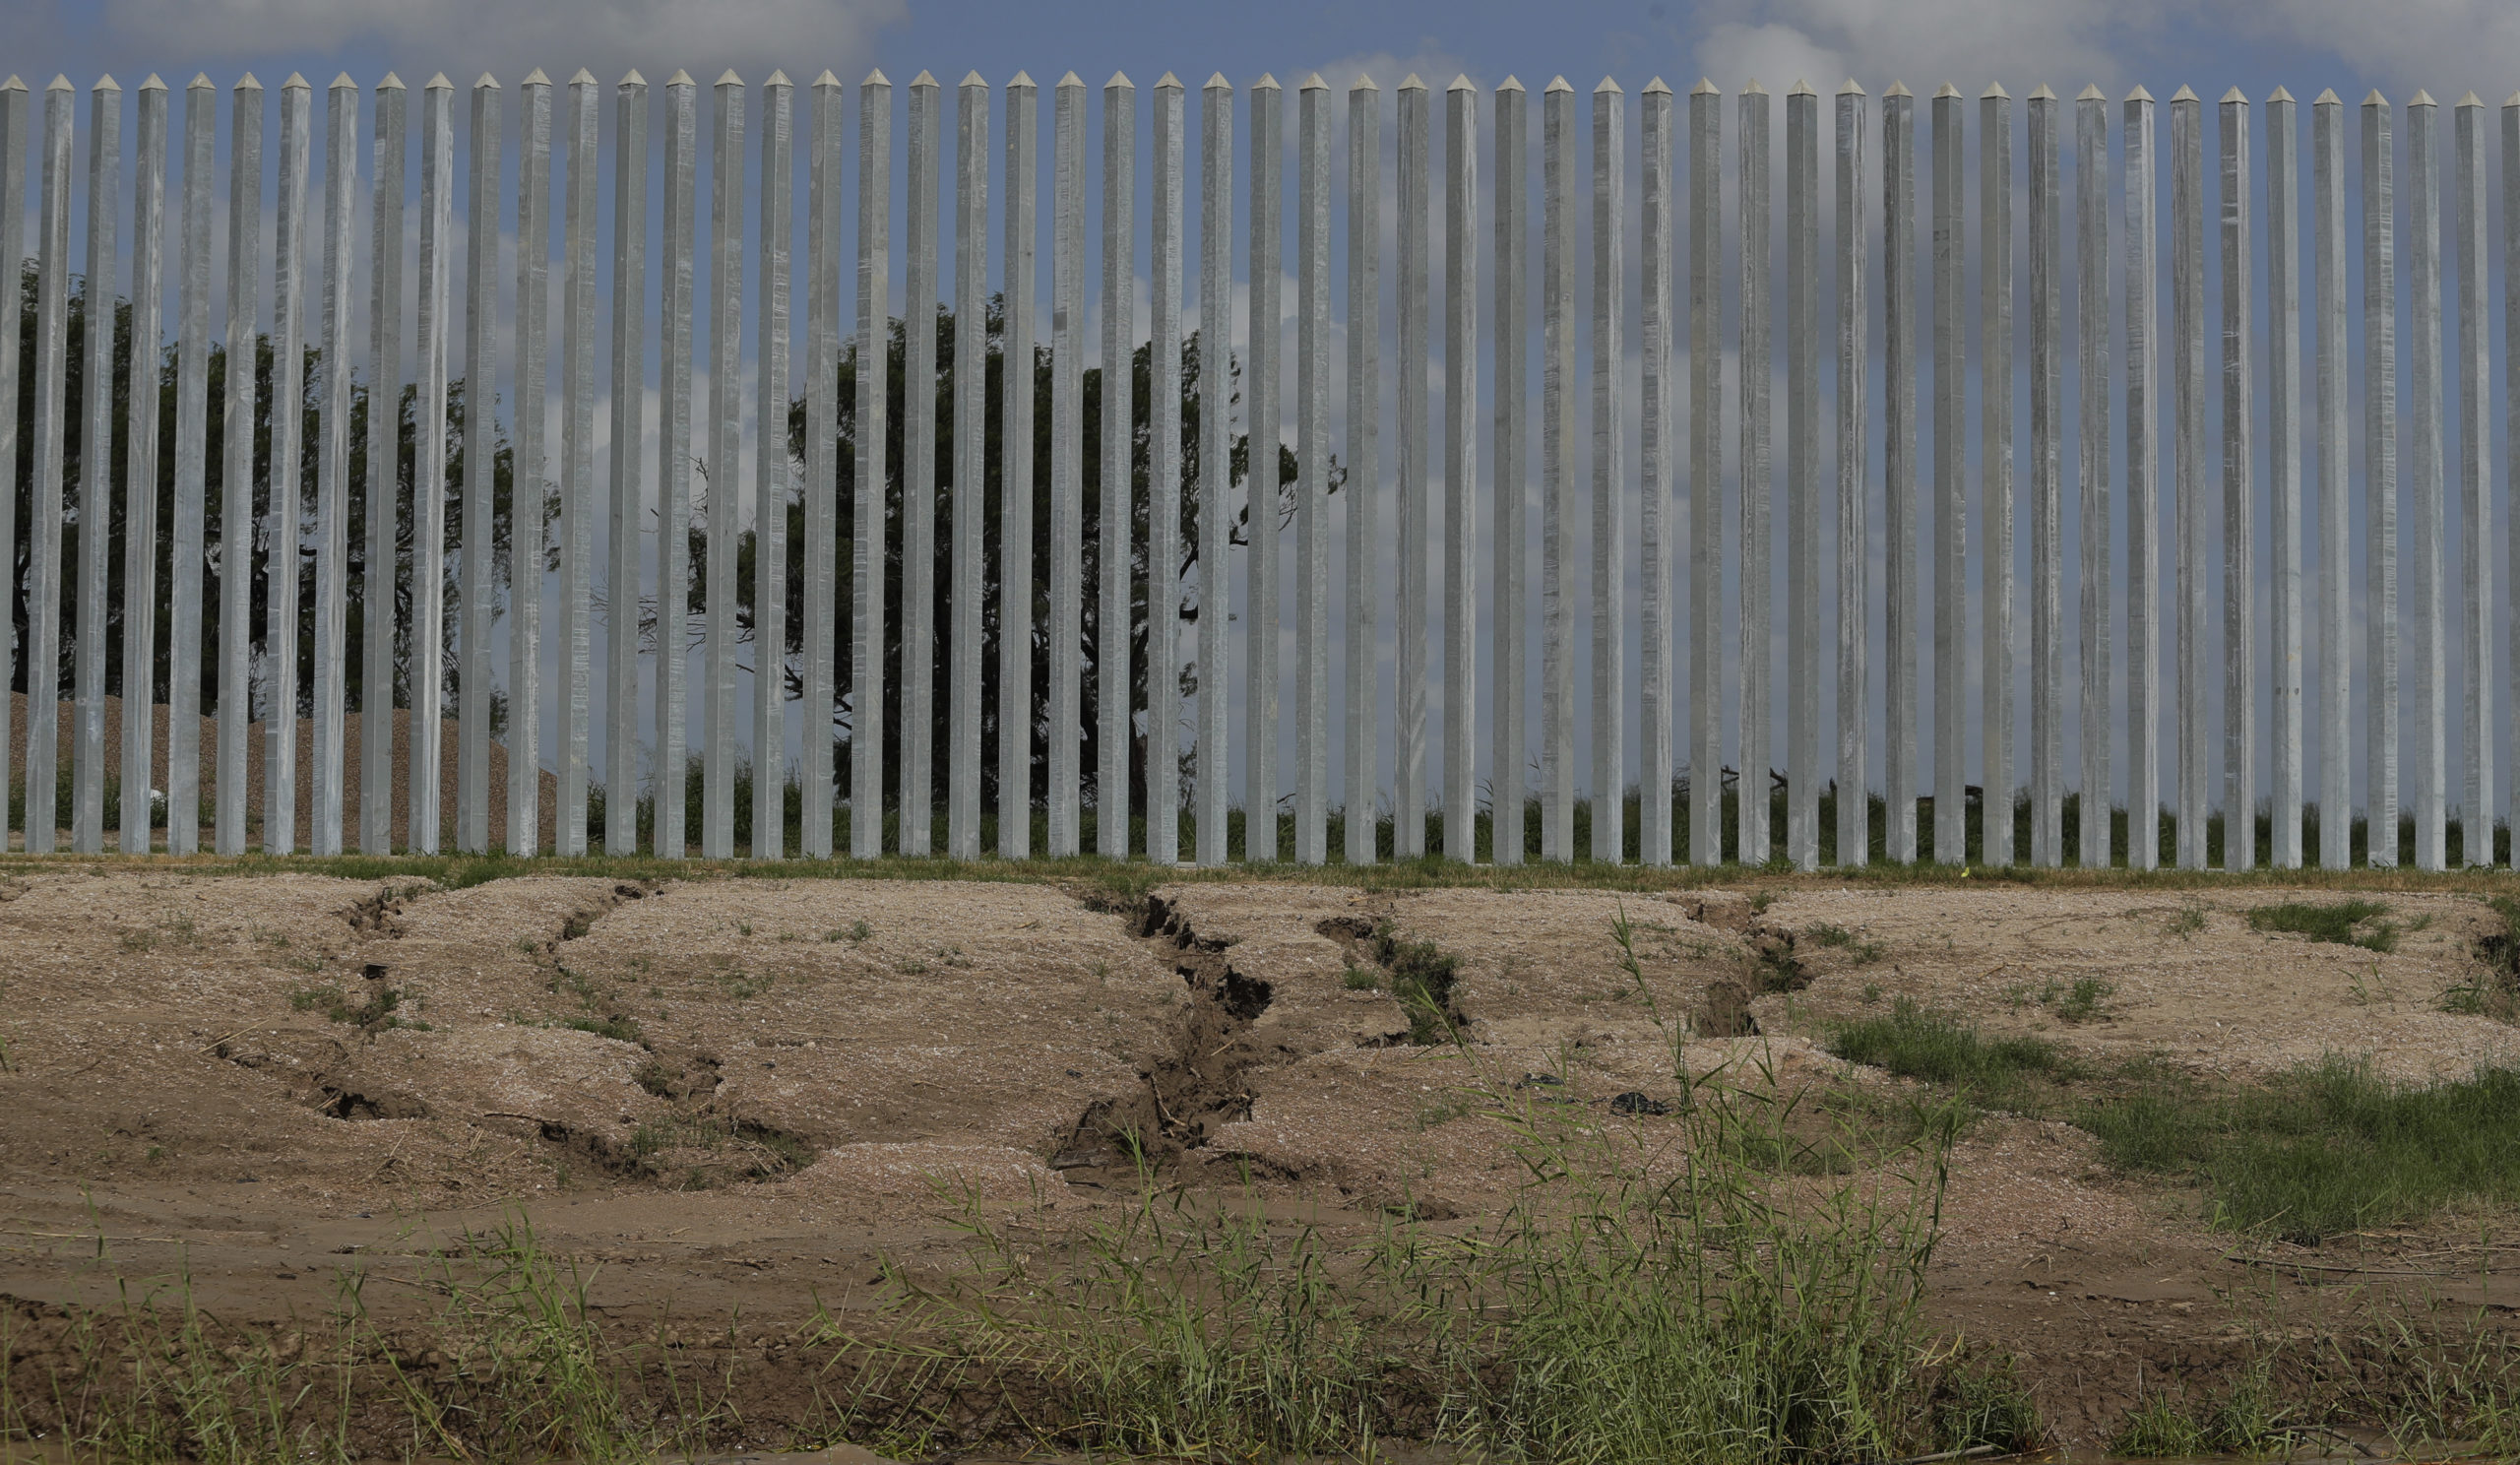 Erosion damage caused by Hurricane Hanna is seen along the Fisher border wall, a privately funded border fence, along the Rio Grande River near Mission, Texas.